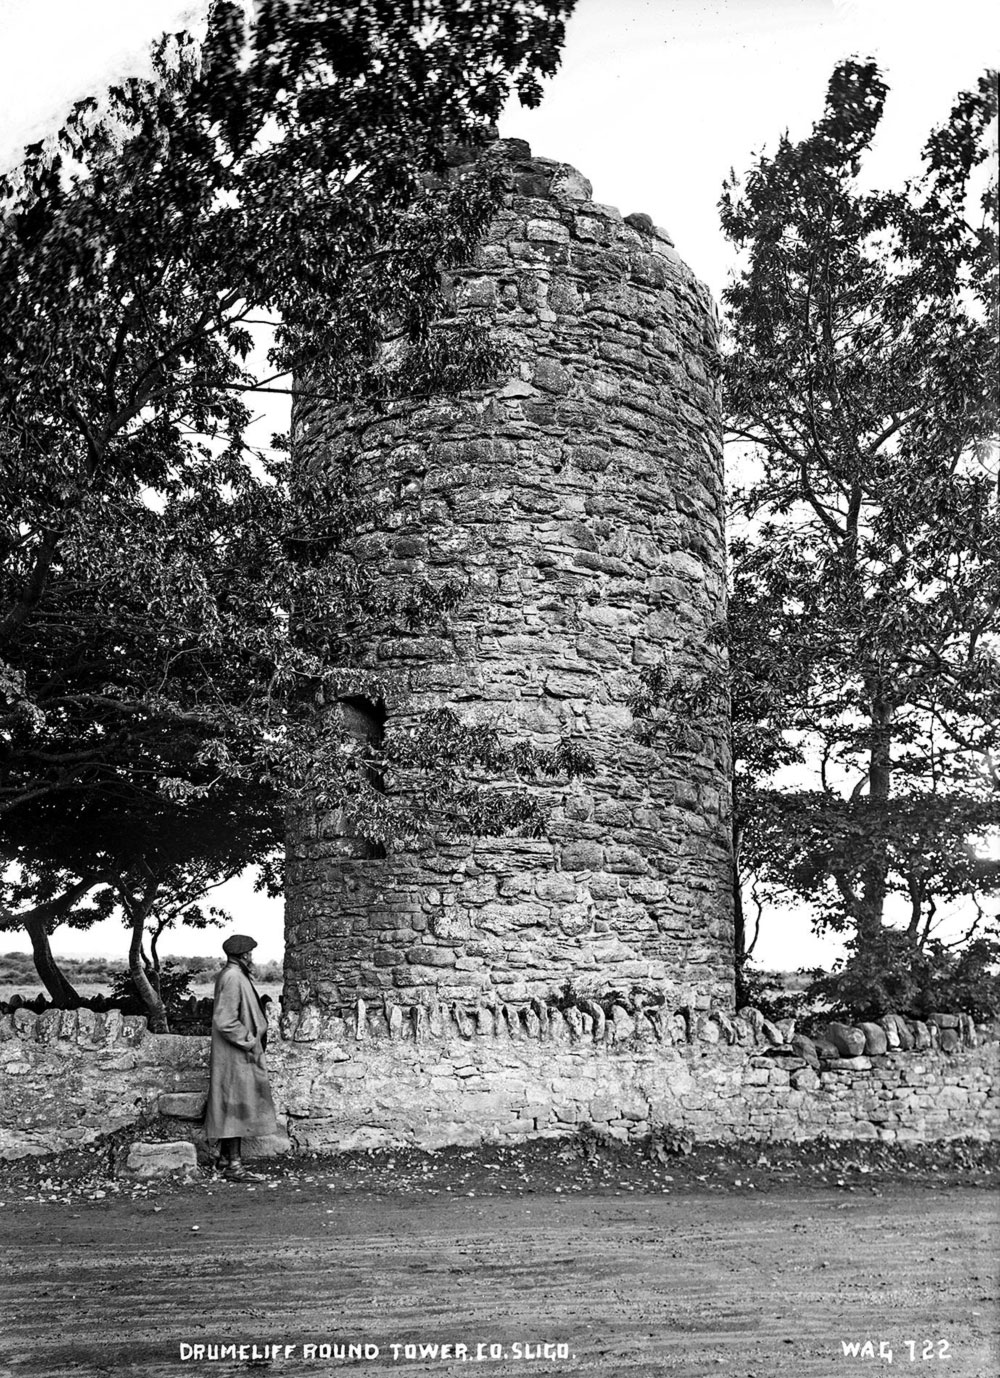 The round tower at Drumcliffe. Image by W. A. Green, © NMNI.